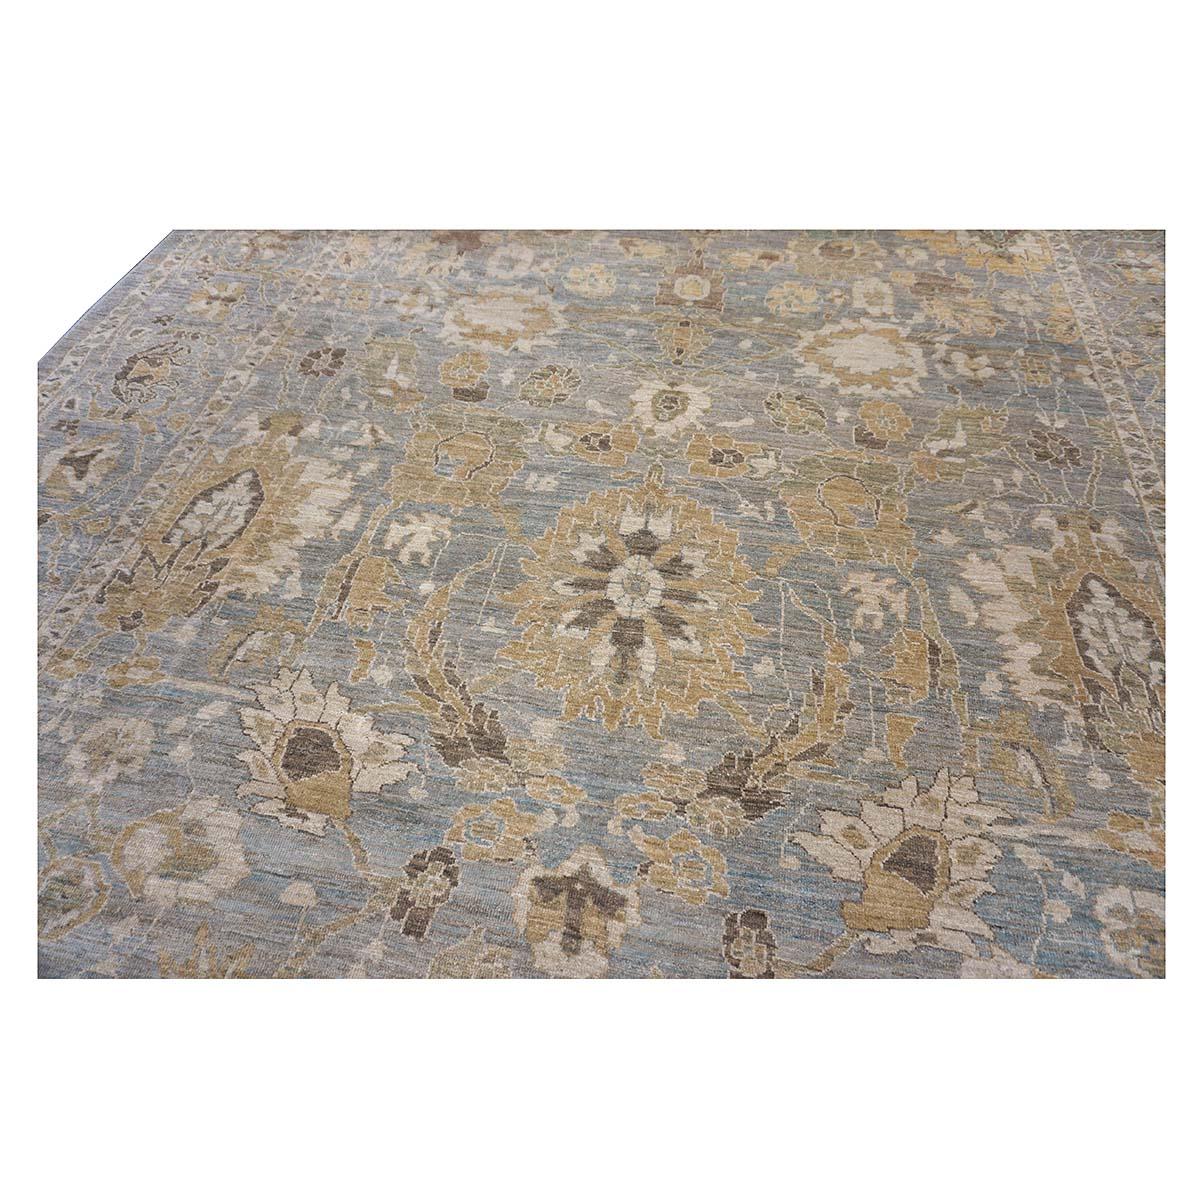 Oversized Persian Sultanabad Master 12x18 Blue, Grey, & Tan Handmade Area Rug For Sale 9